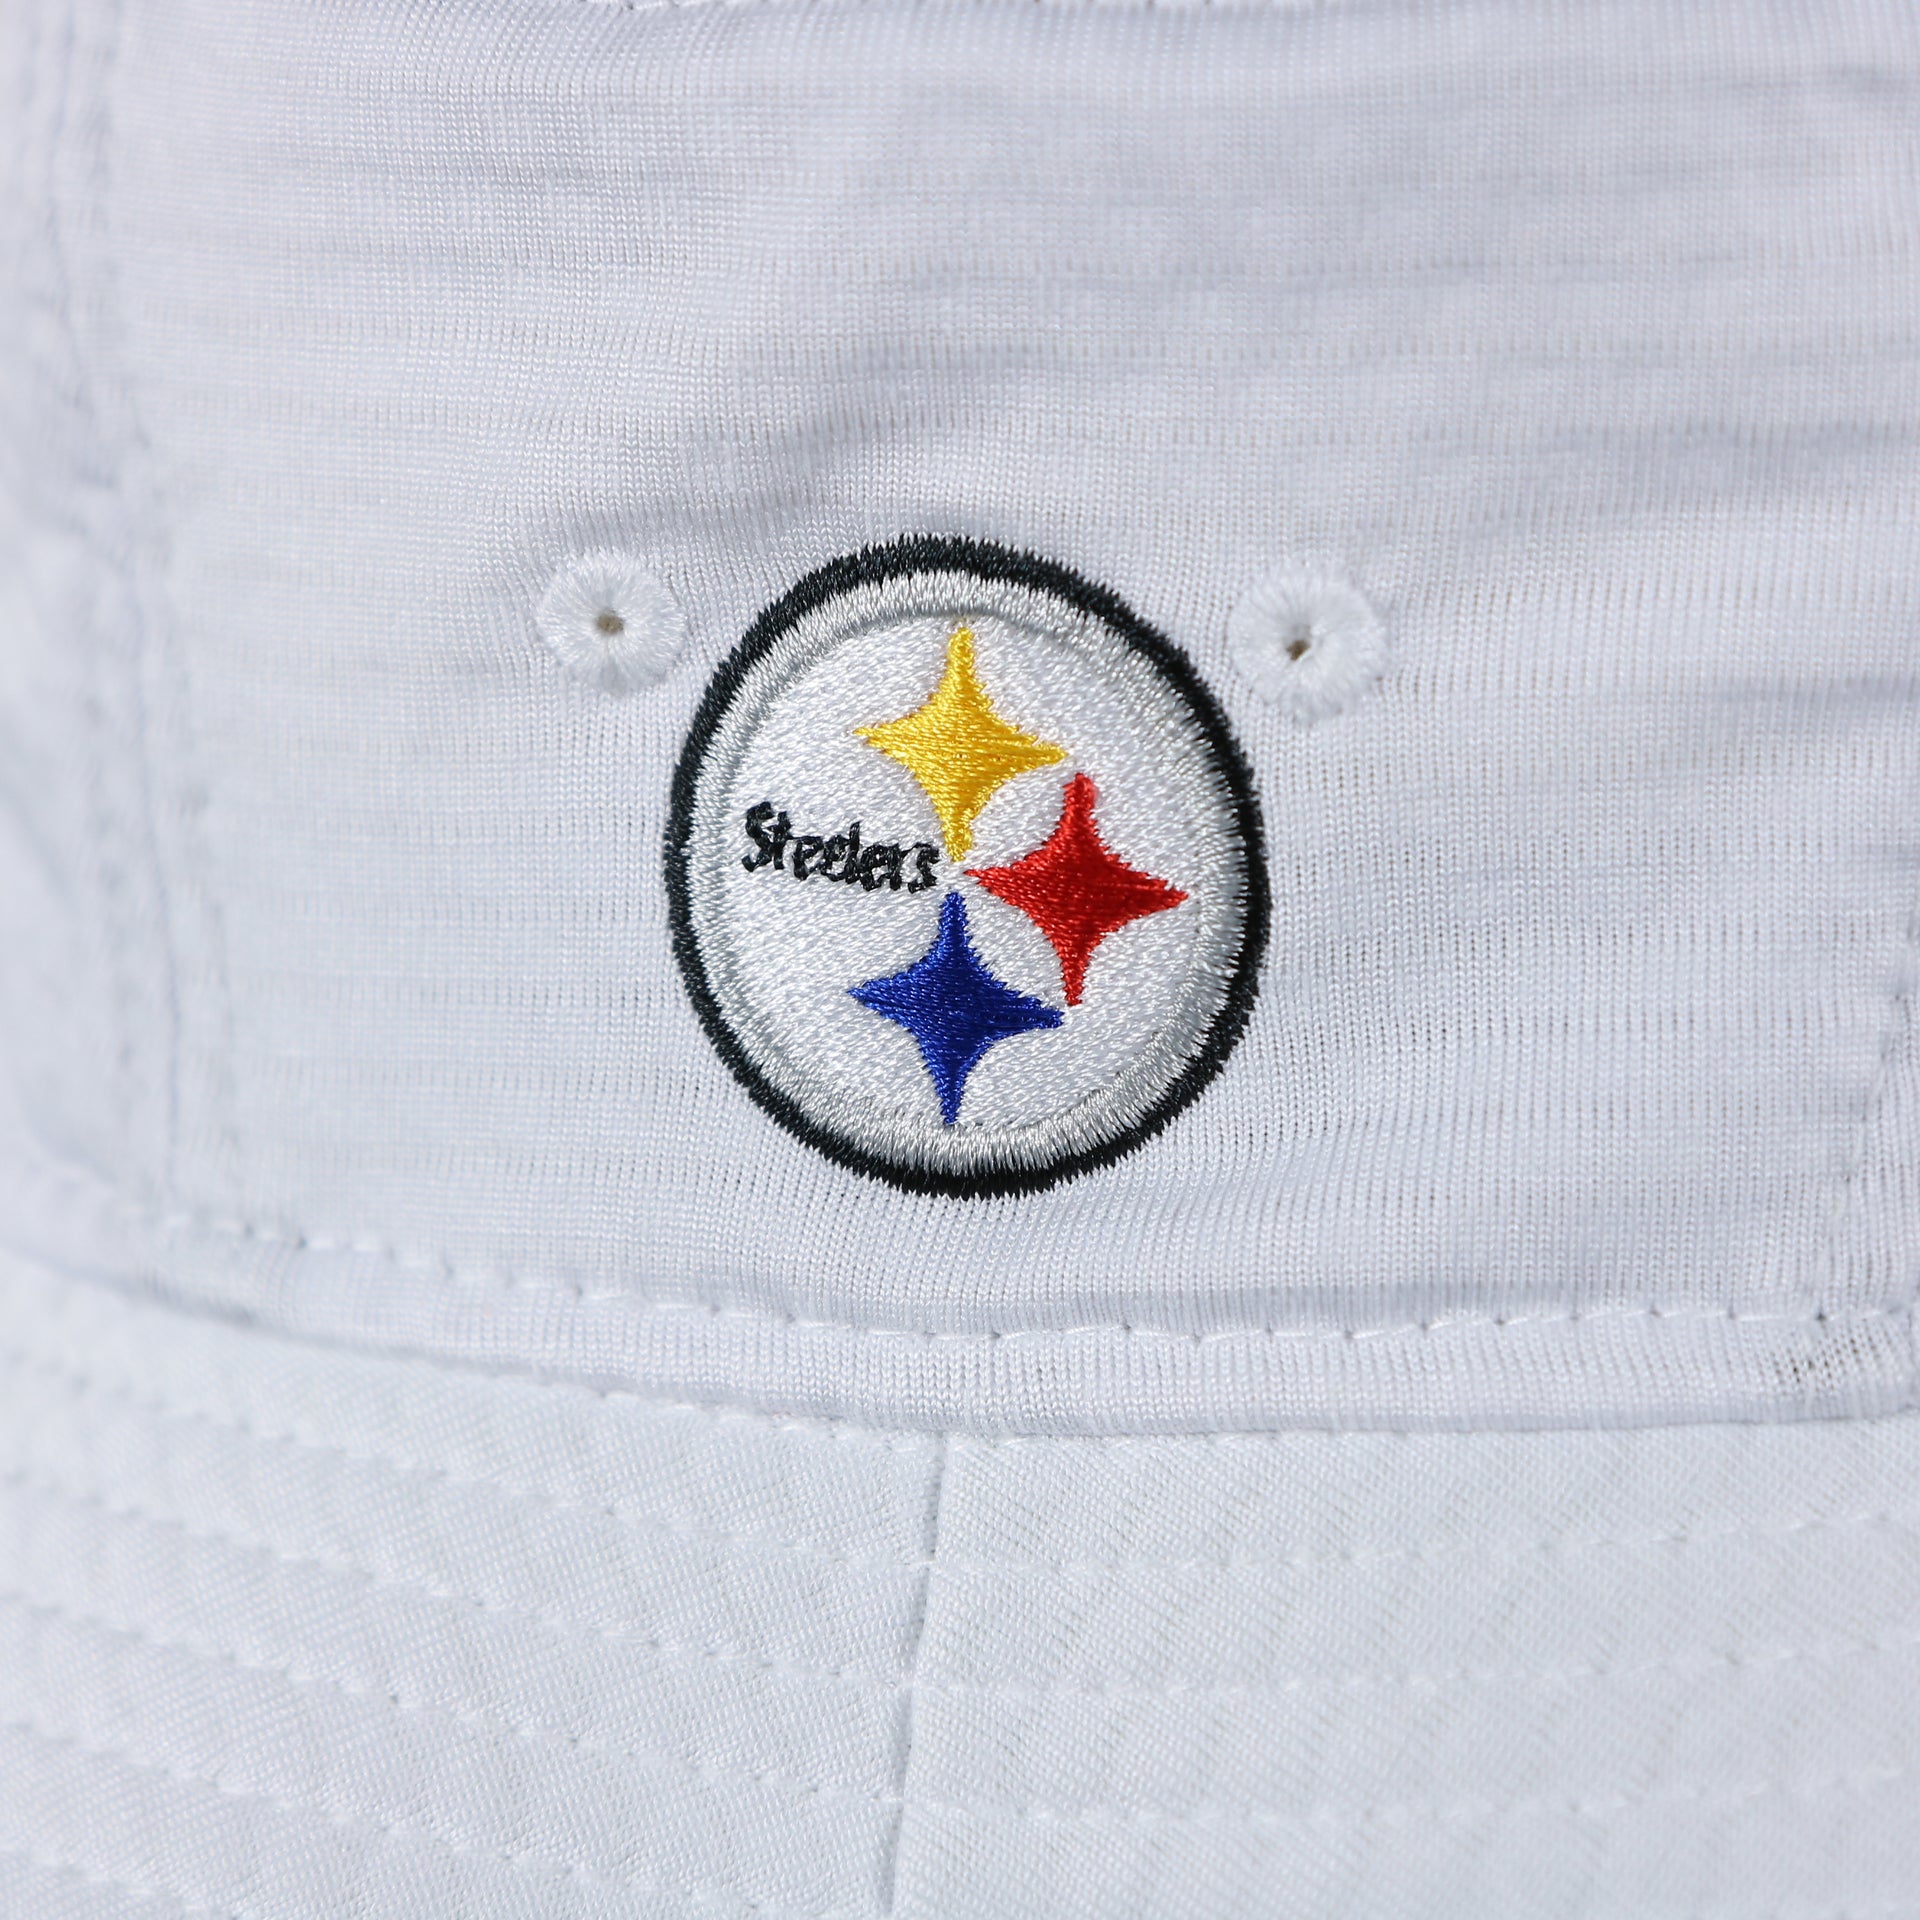 steelers logo on the Pittsburgh Steelers 2022 Pro Bowl AFC Logo Steelers Side Patch White Bucket Hat